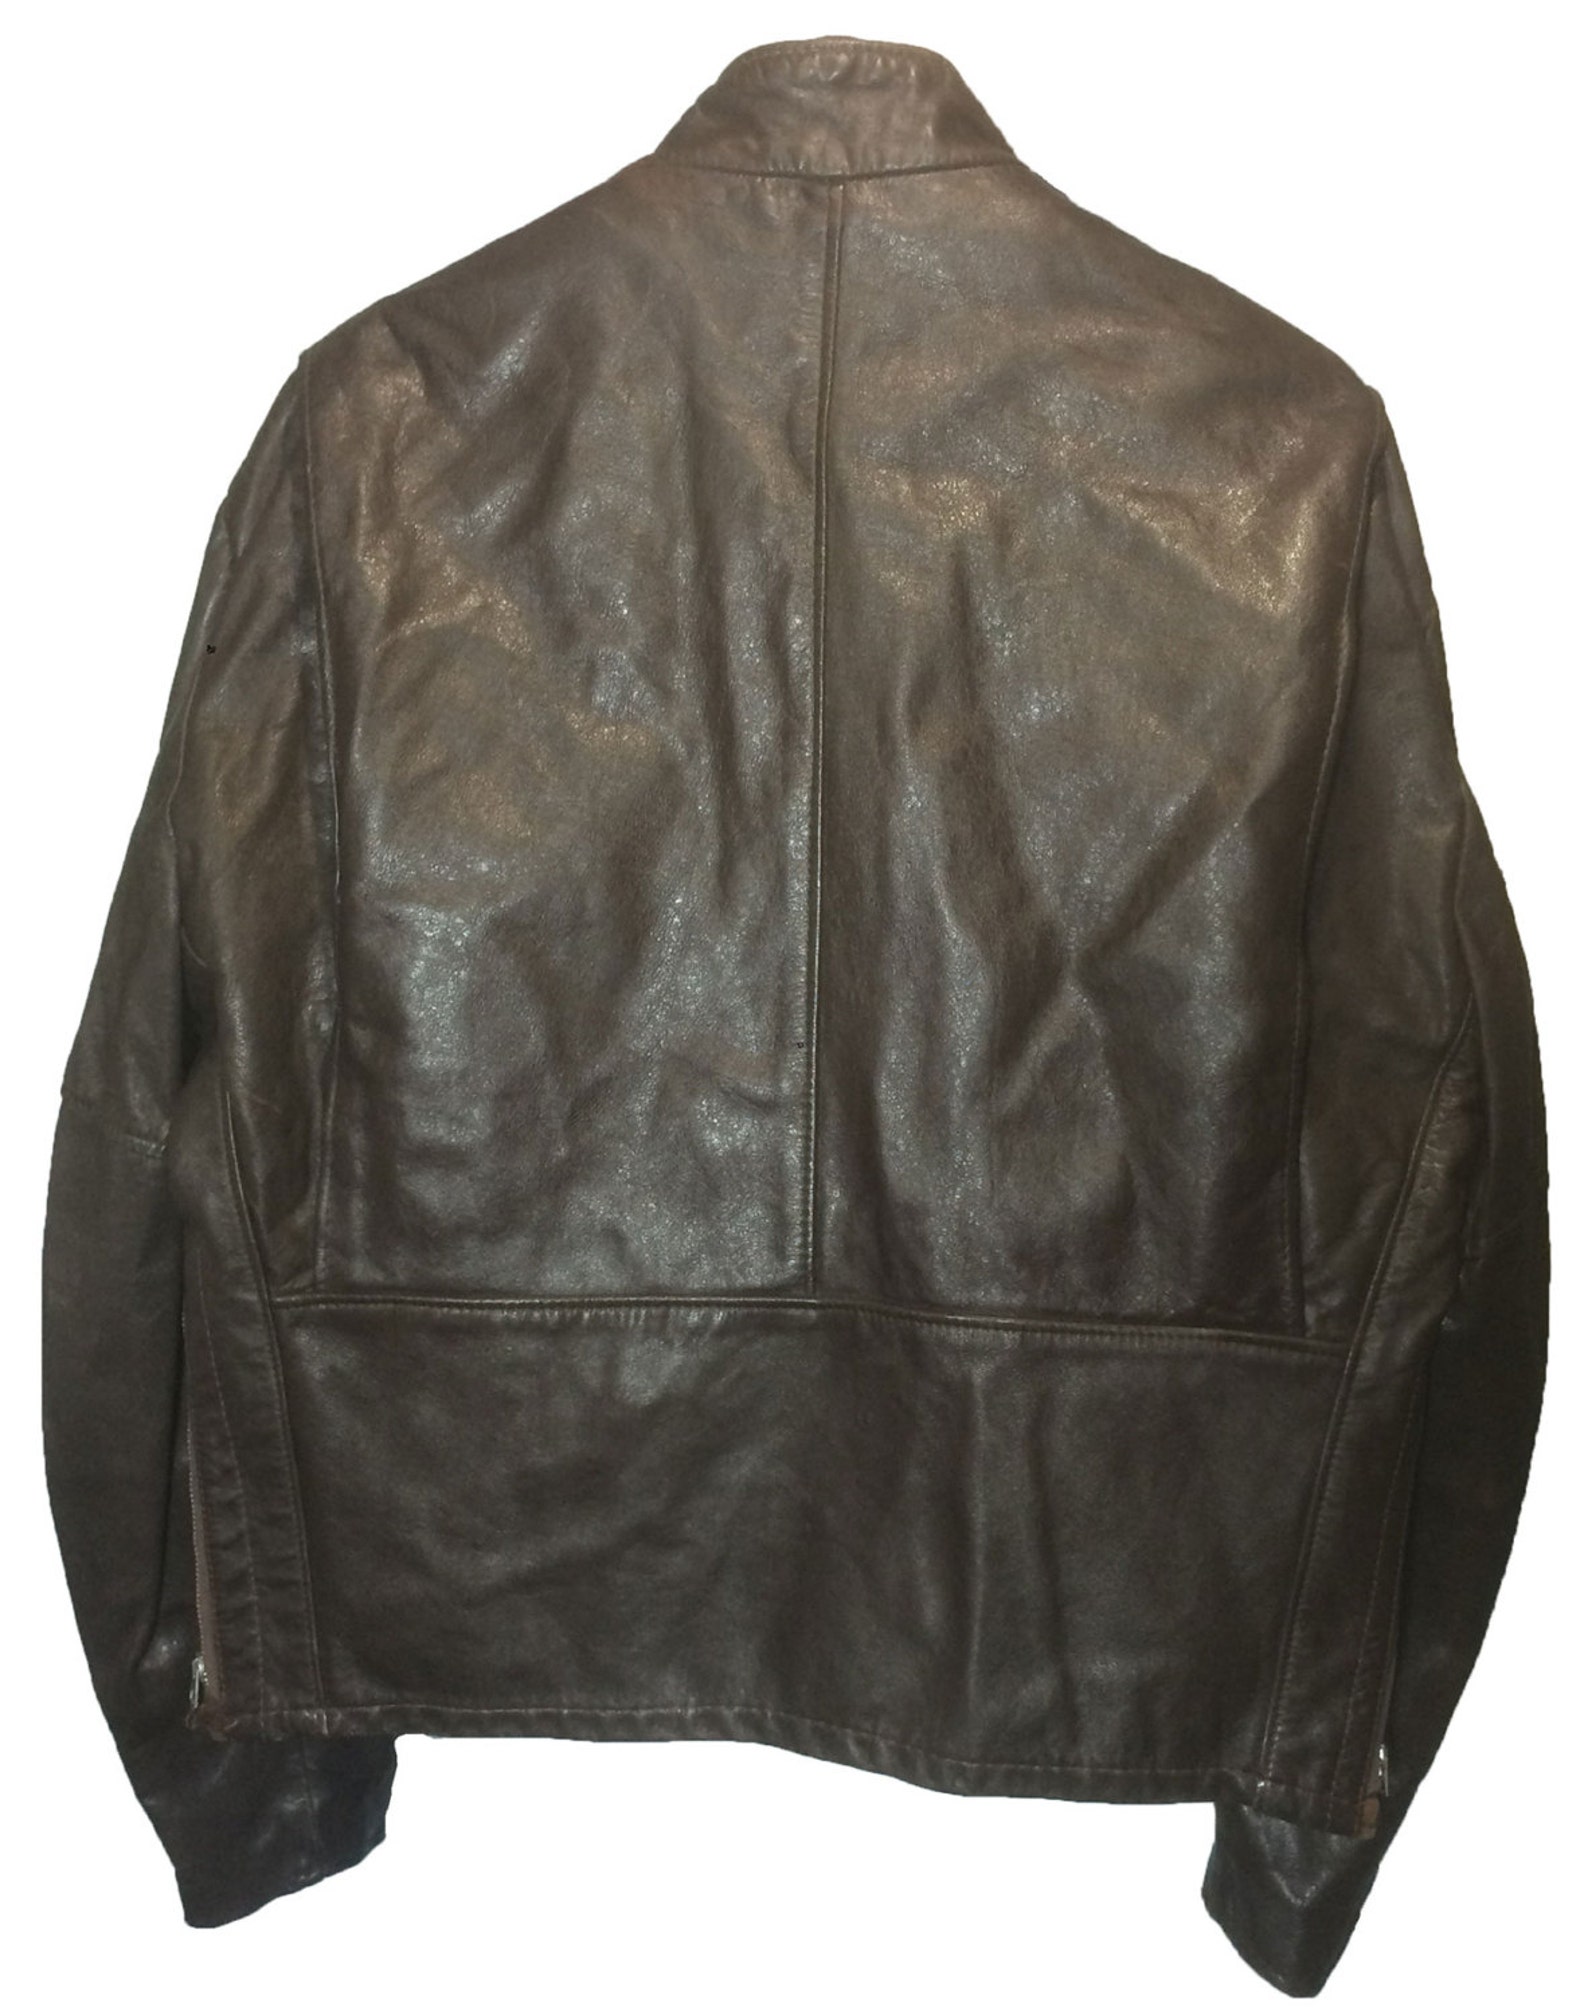 EXCELLED BROWN LEATHER Cafe Racer Motorcycle Jacket Men's Size 46 ...